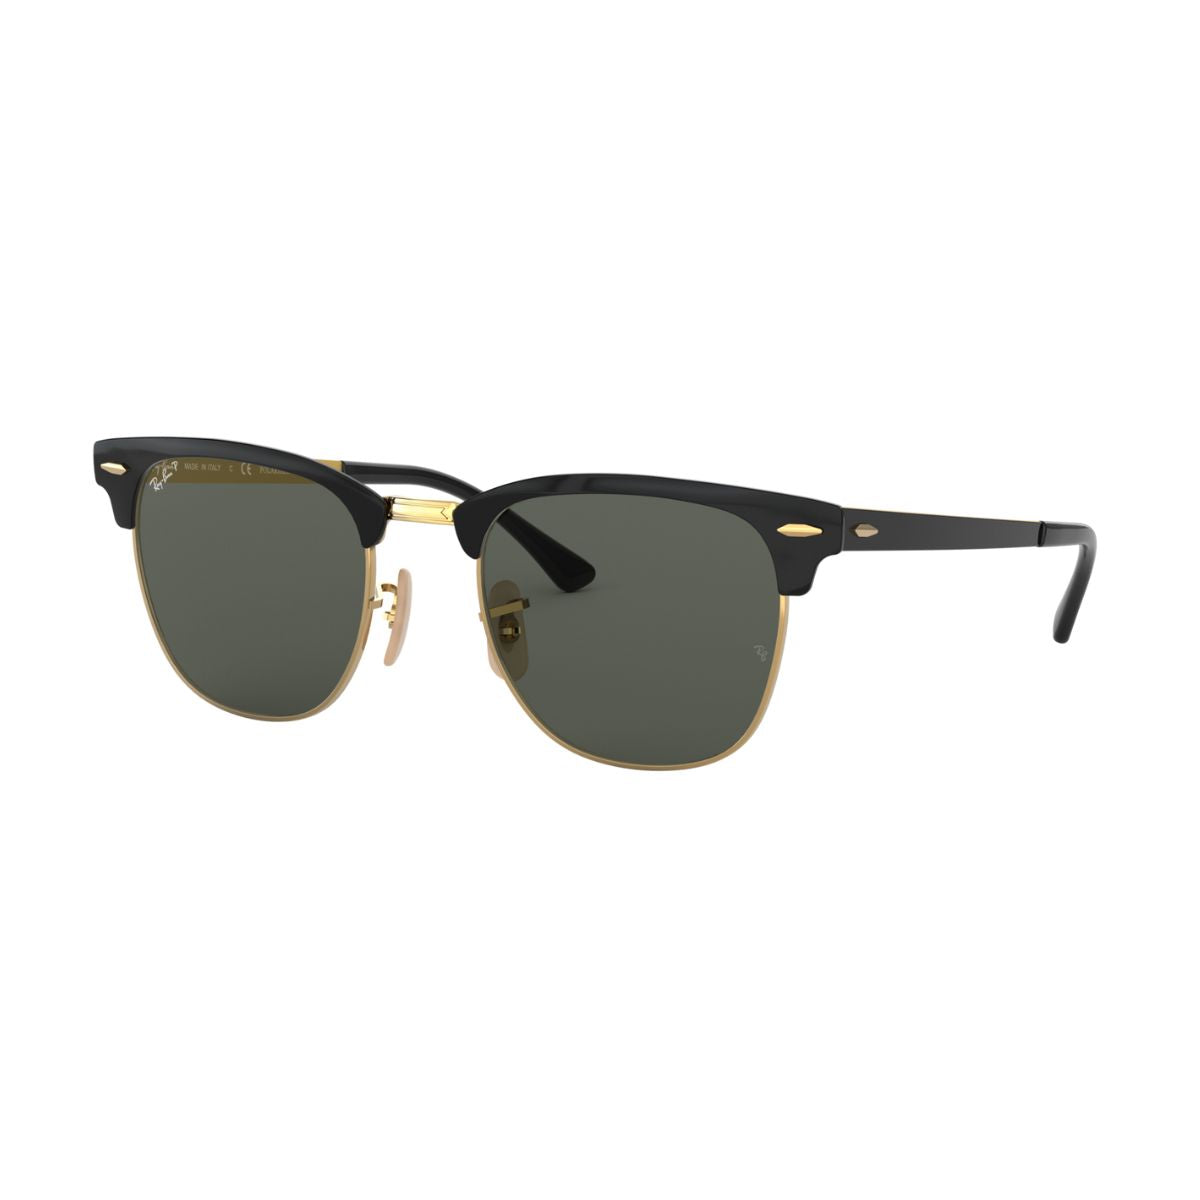 "Buy Online Ray Ban 3716 187/58 Square Polarized Sunglass For Men And Women At Optorium"